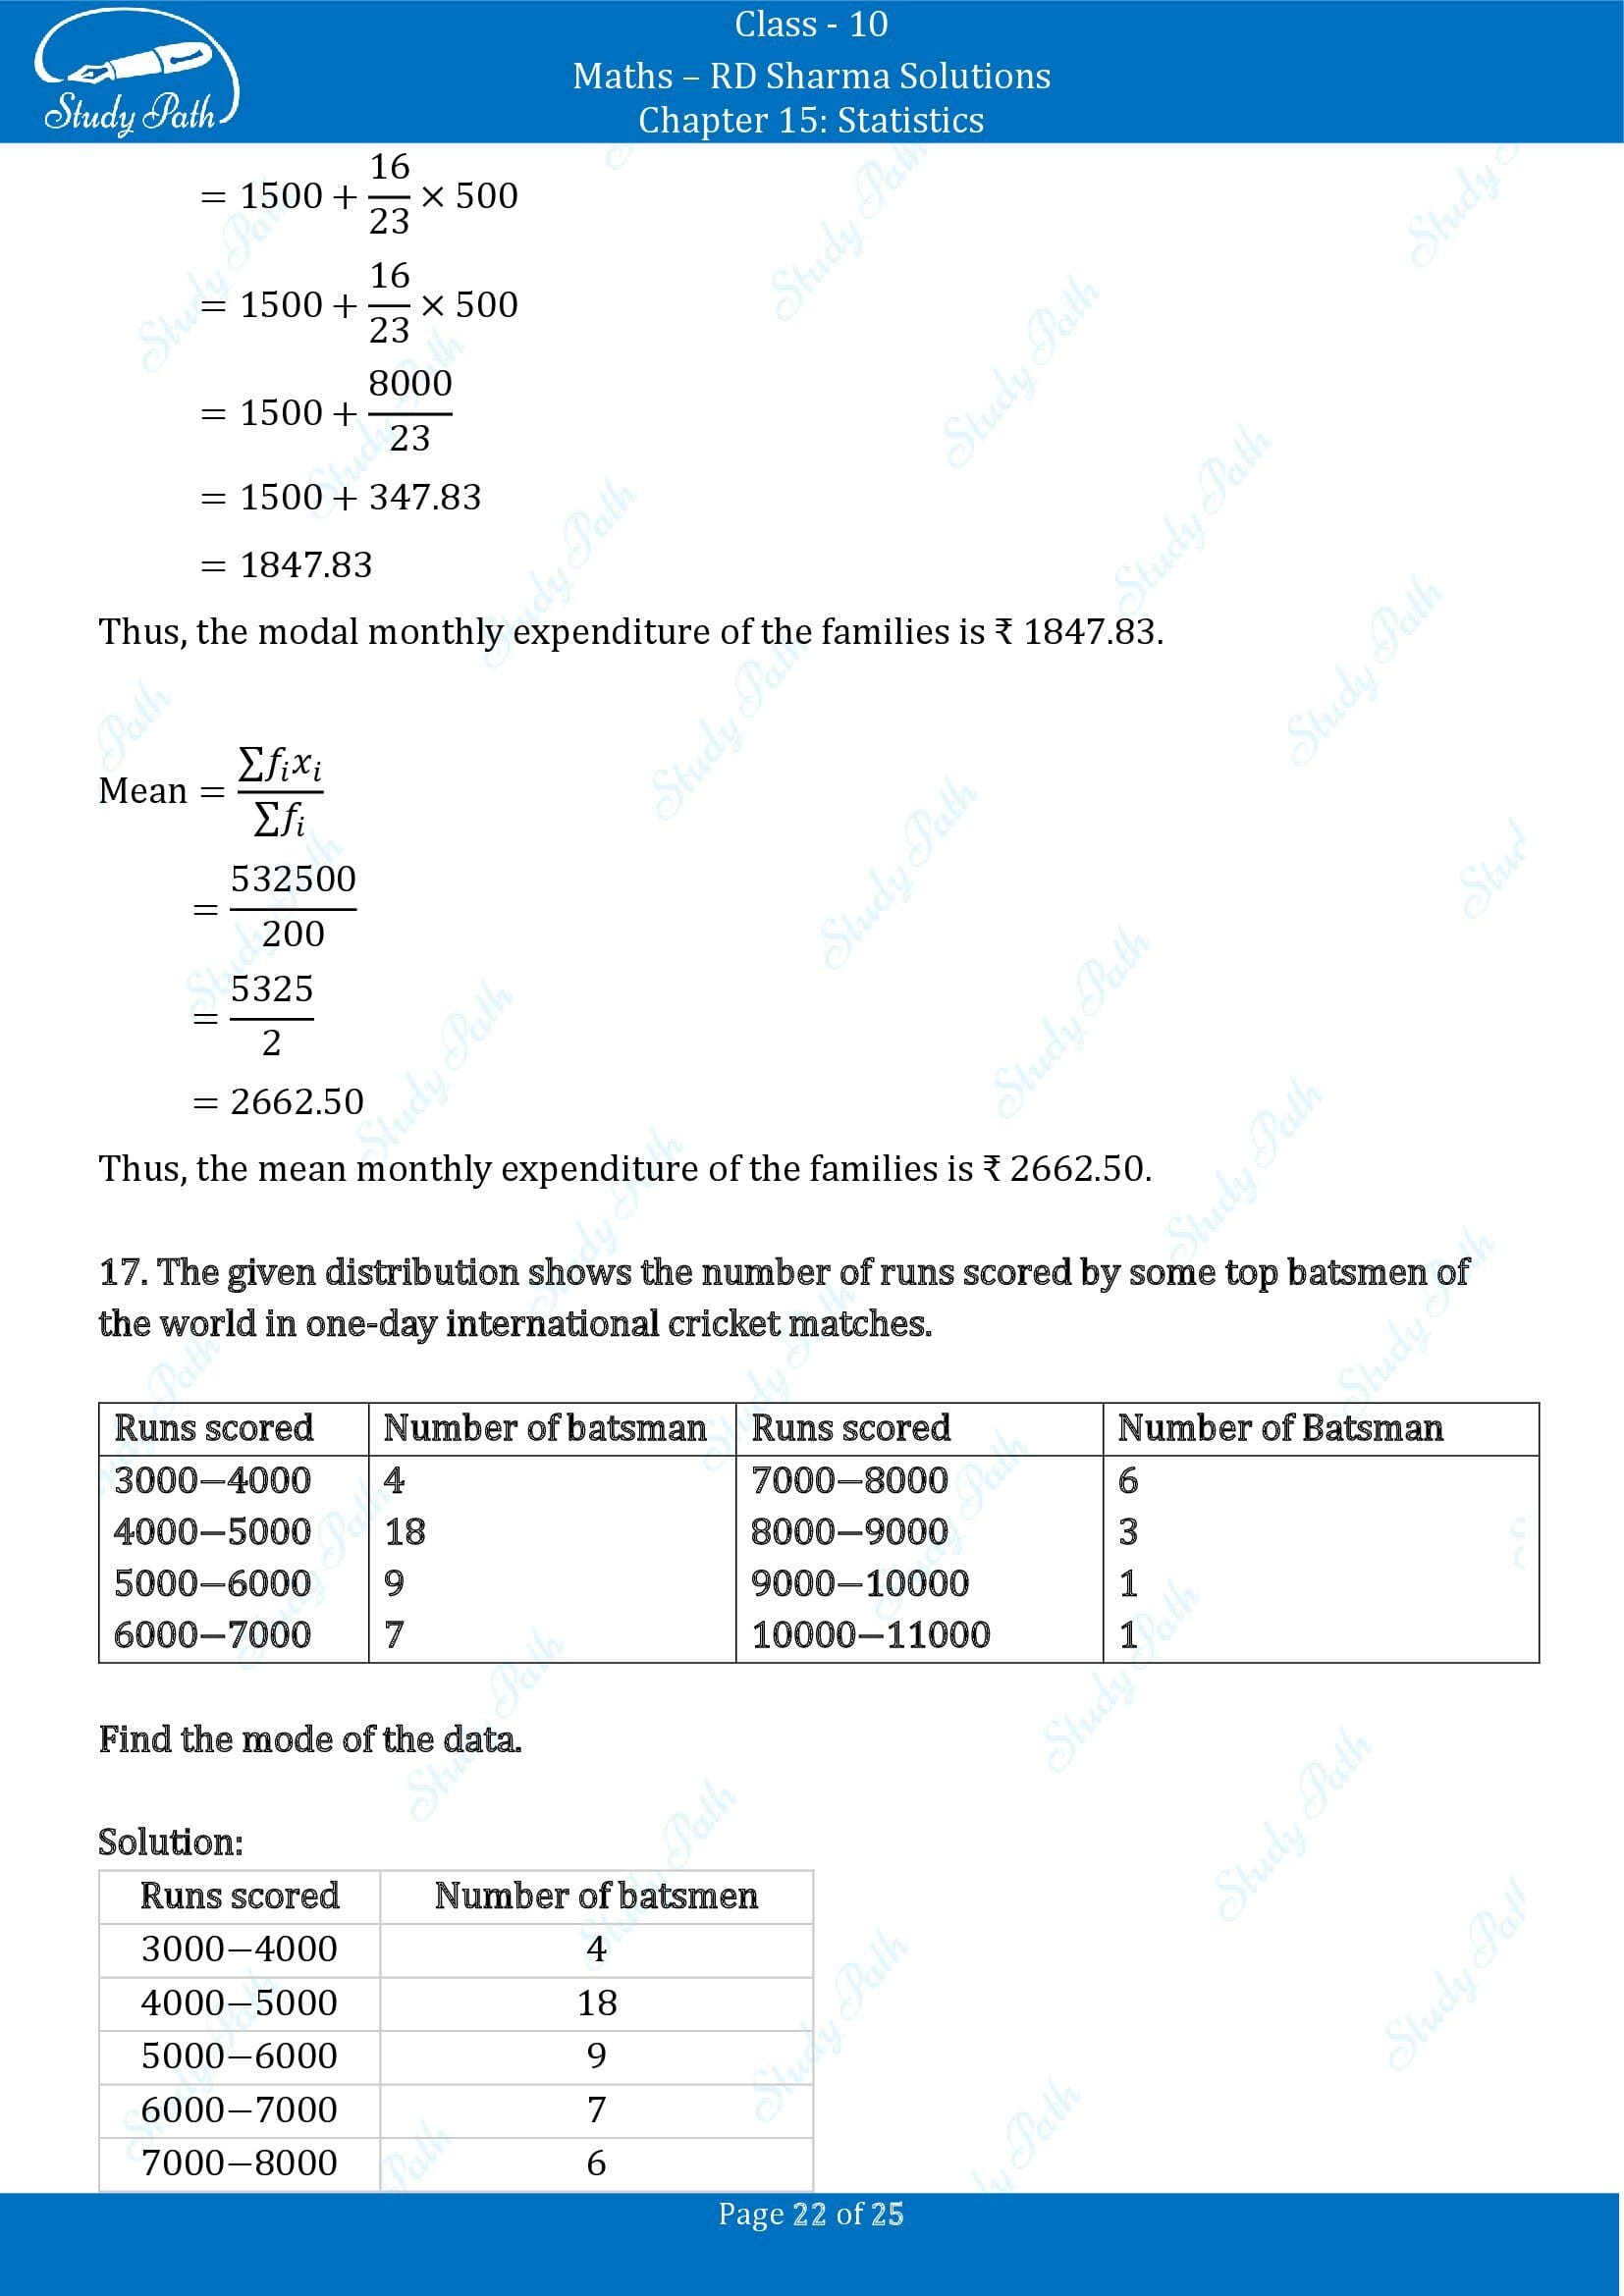 RD Sharma Solutions Class 10 Chapter 15 Statistics Exercise 15.5 00022